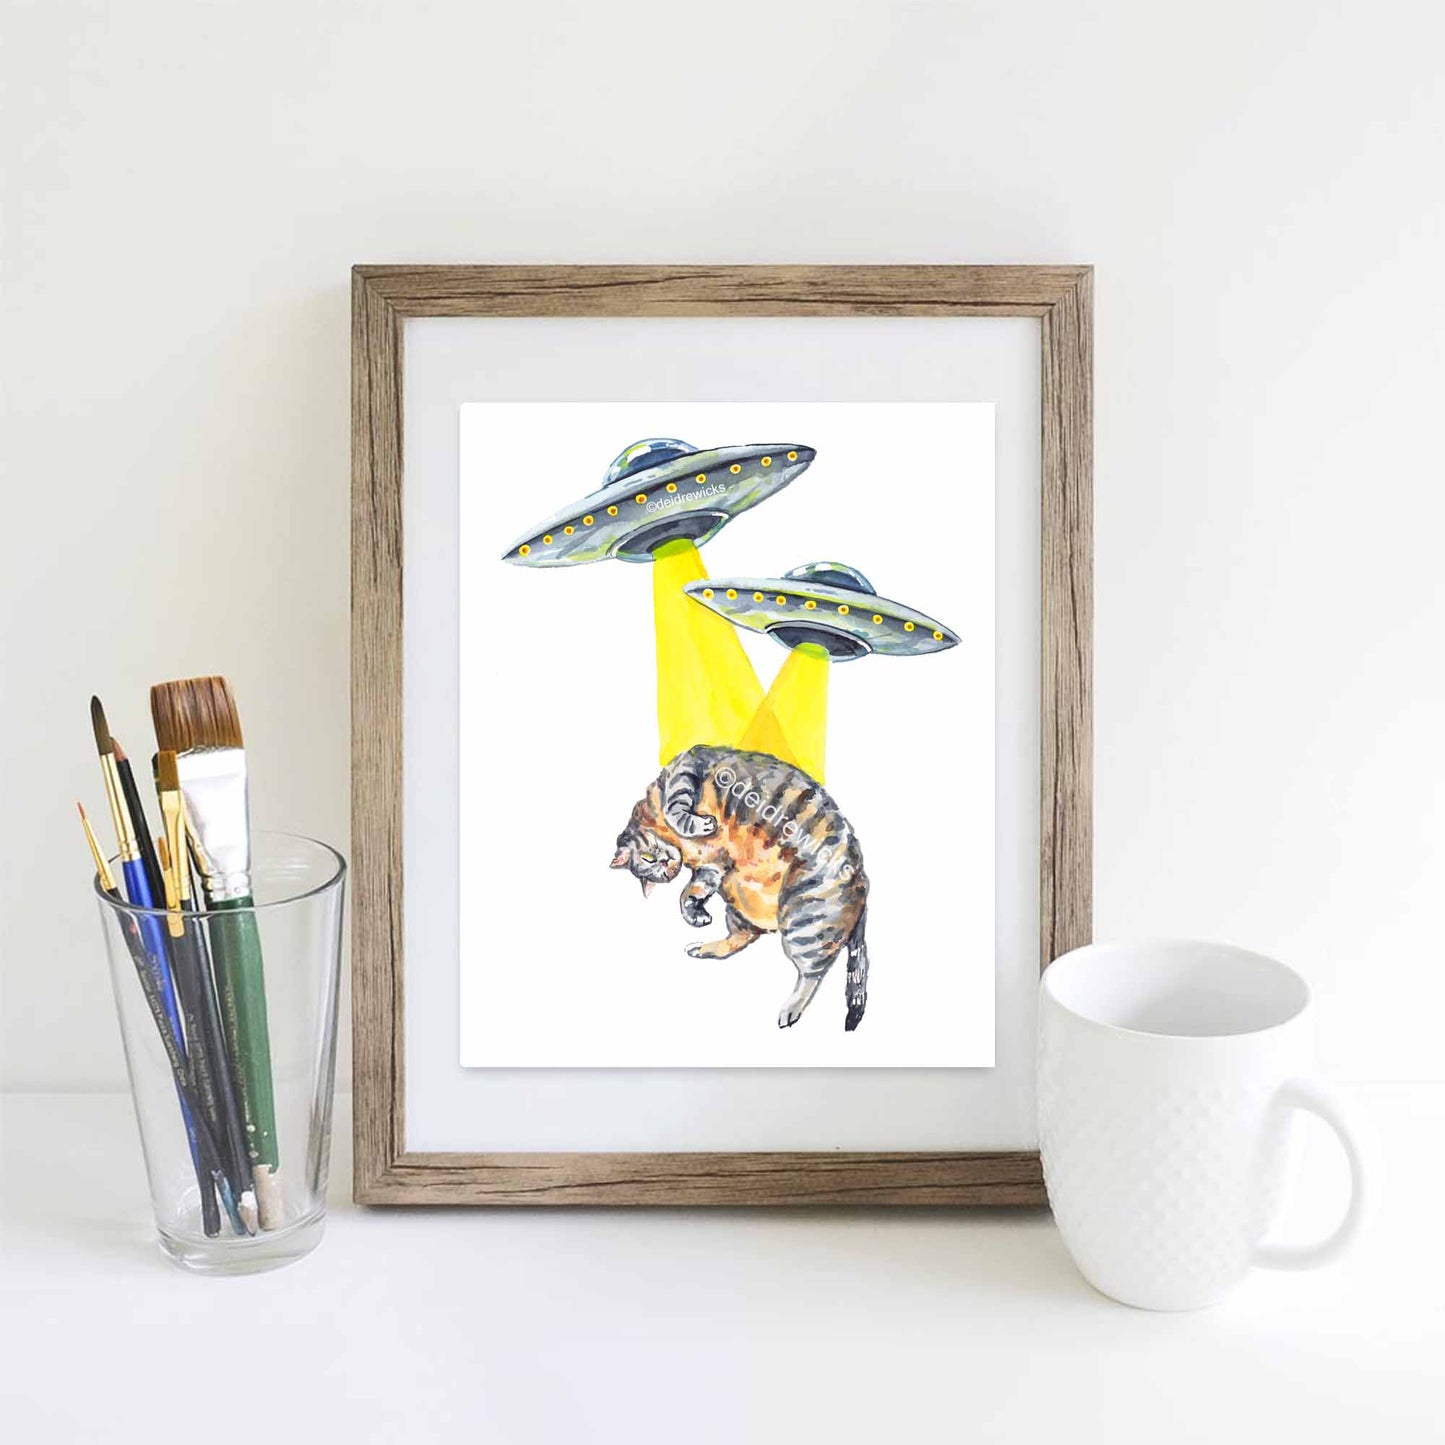 Framed example of a cat and ufo watercolour painting by artist Deidre Wicks